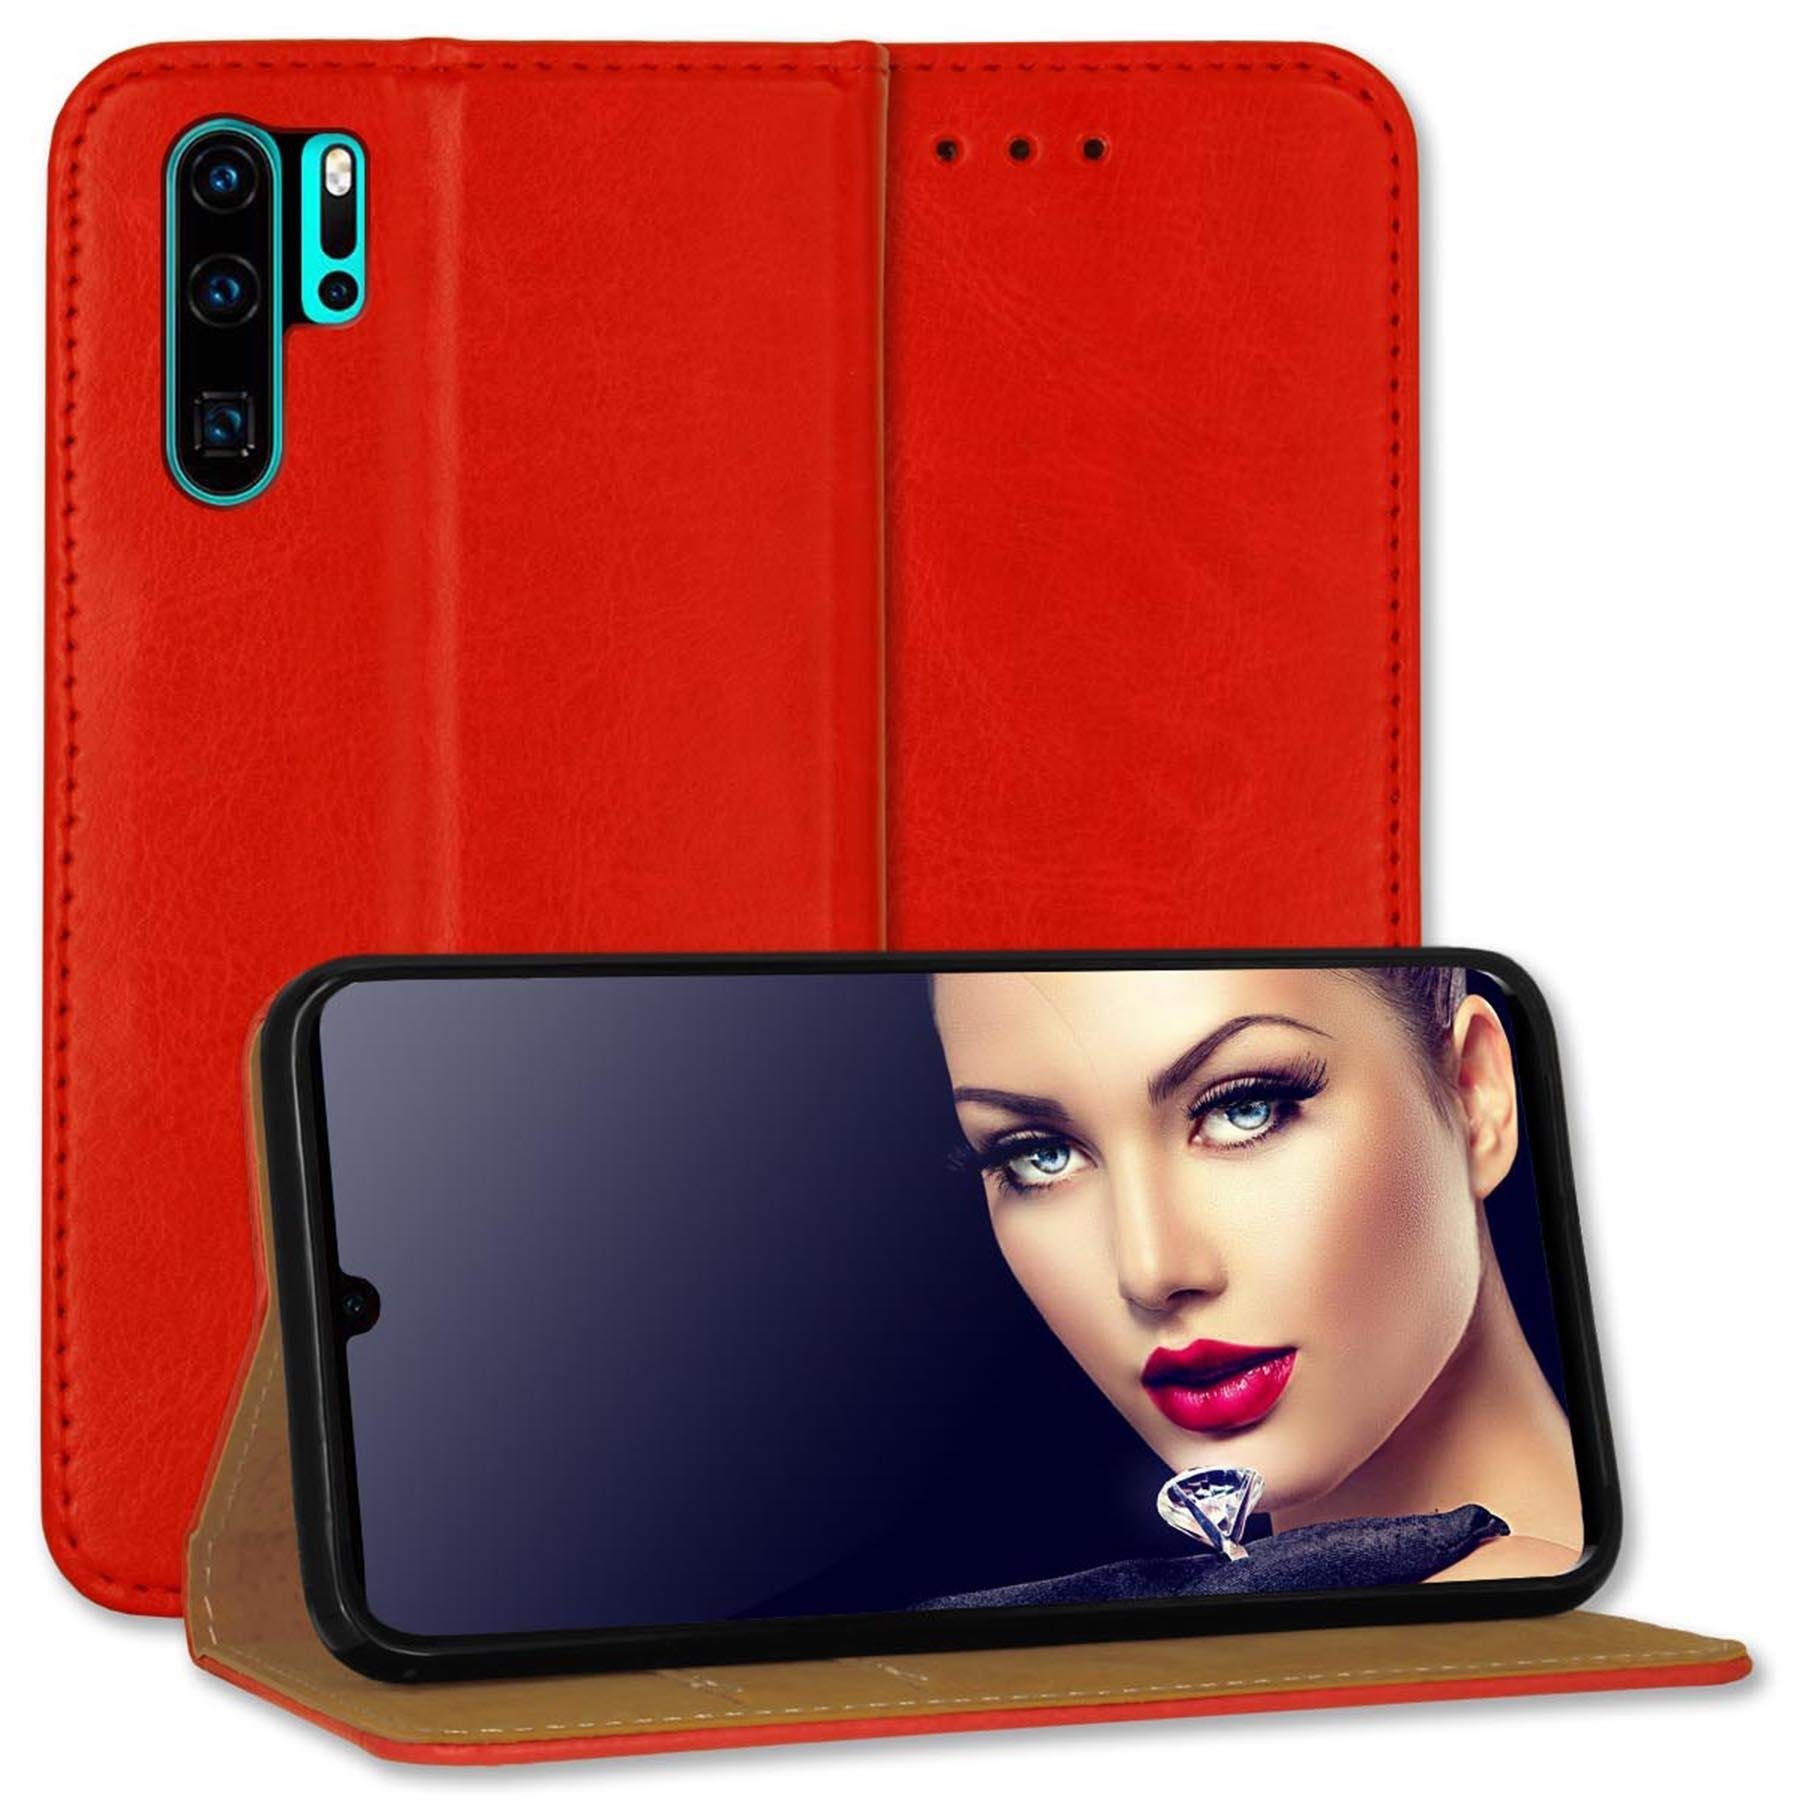 mtb more energy Smartphone-Hülle Bookstyle Business - Farbe rot, für: Huawei P30 Pro, P30Pro New Edition (6.47)